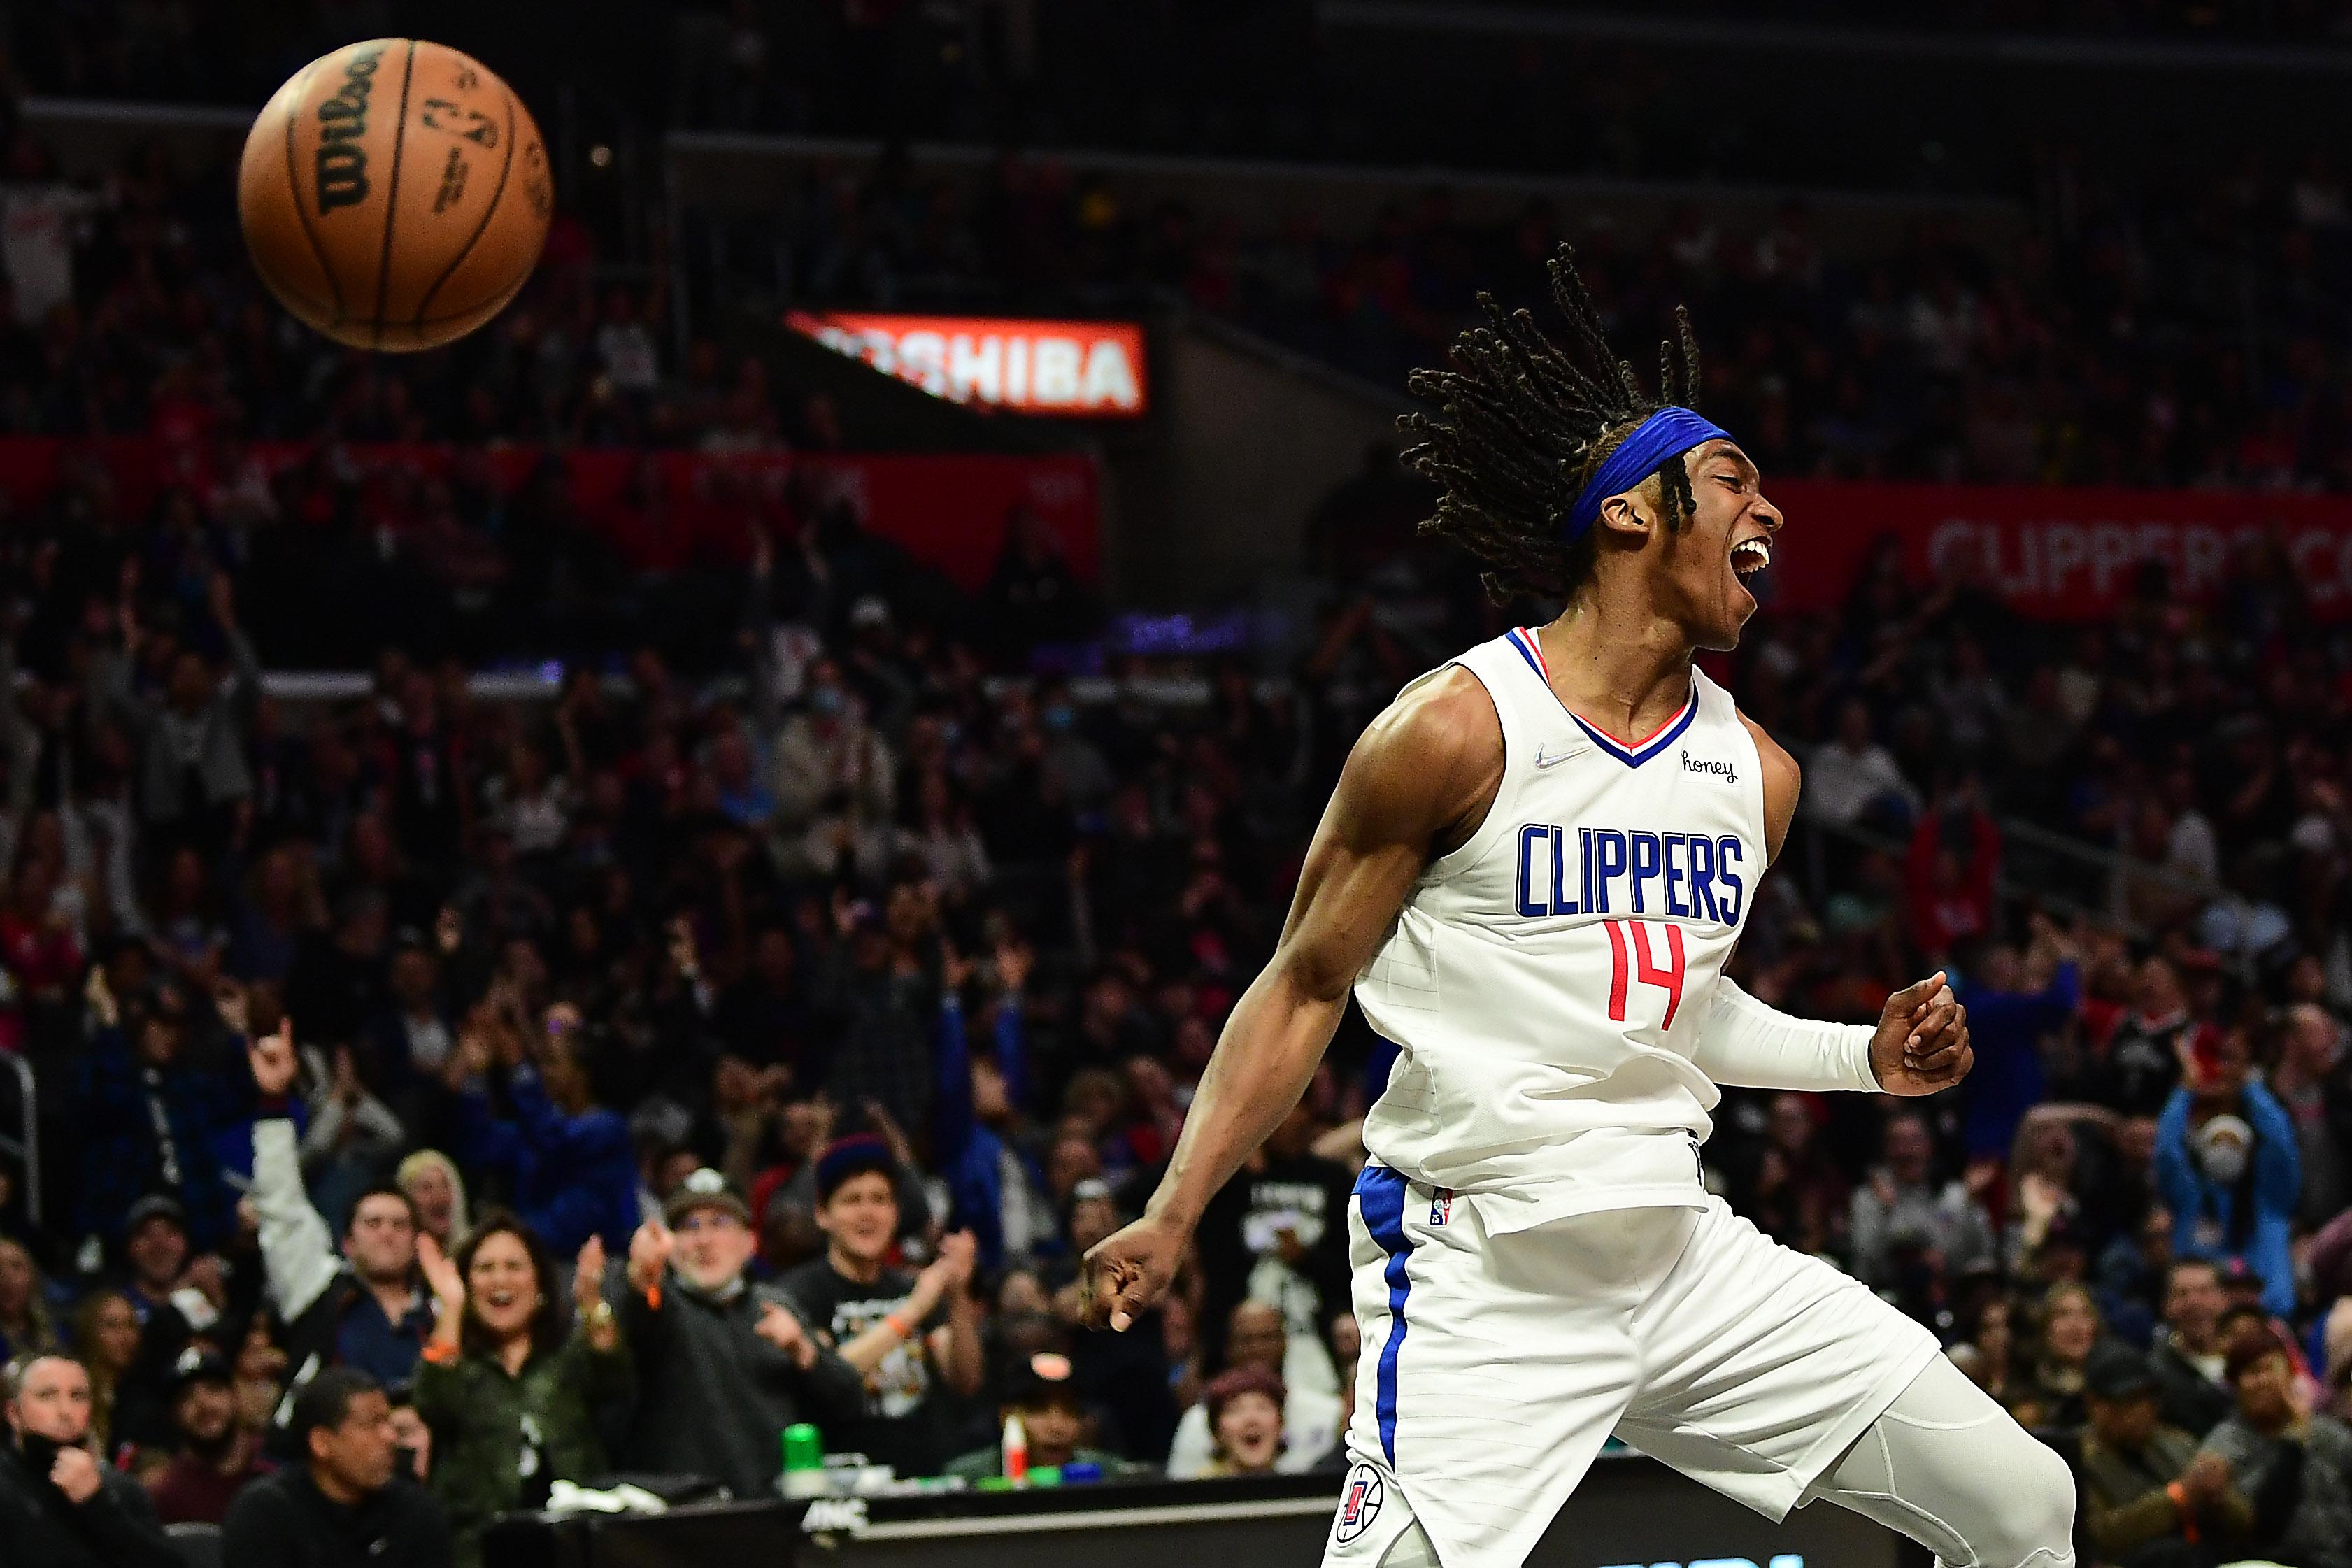 Clippers Playoff Schedule 2022: Games, Opponent, TV Channel & Times for LA in NBA Play-In Tournament (Updated)